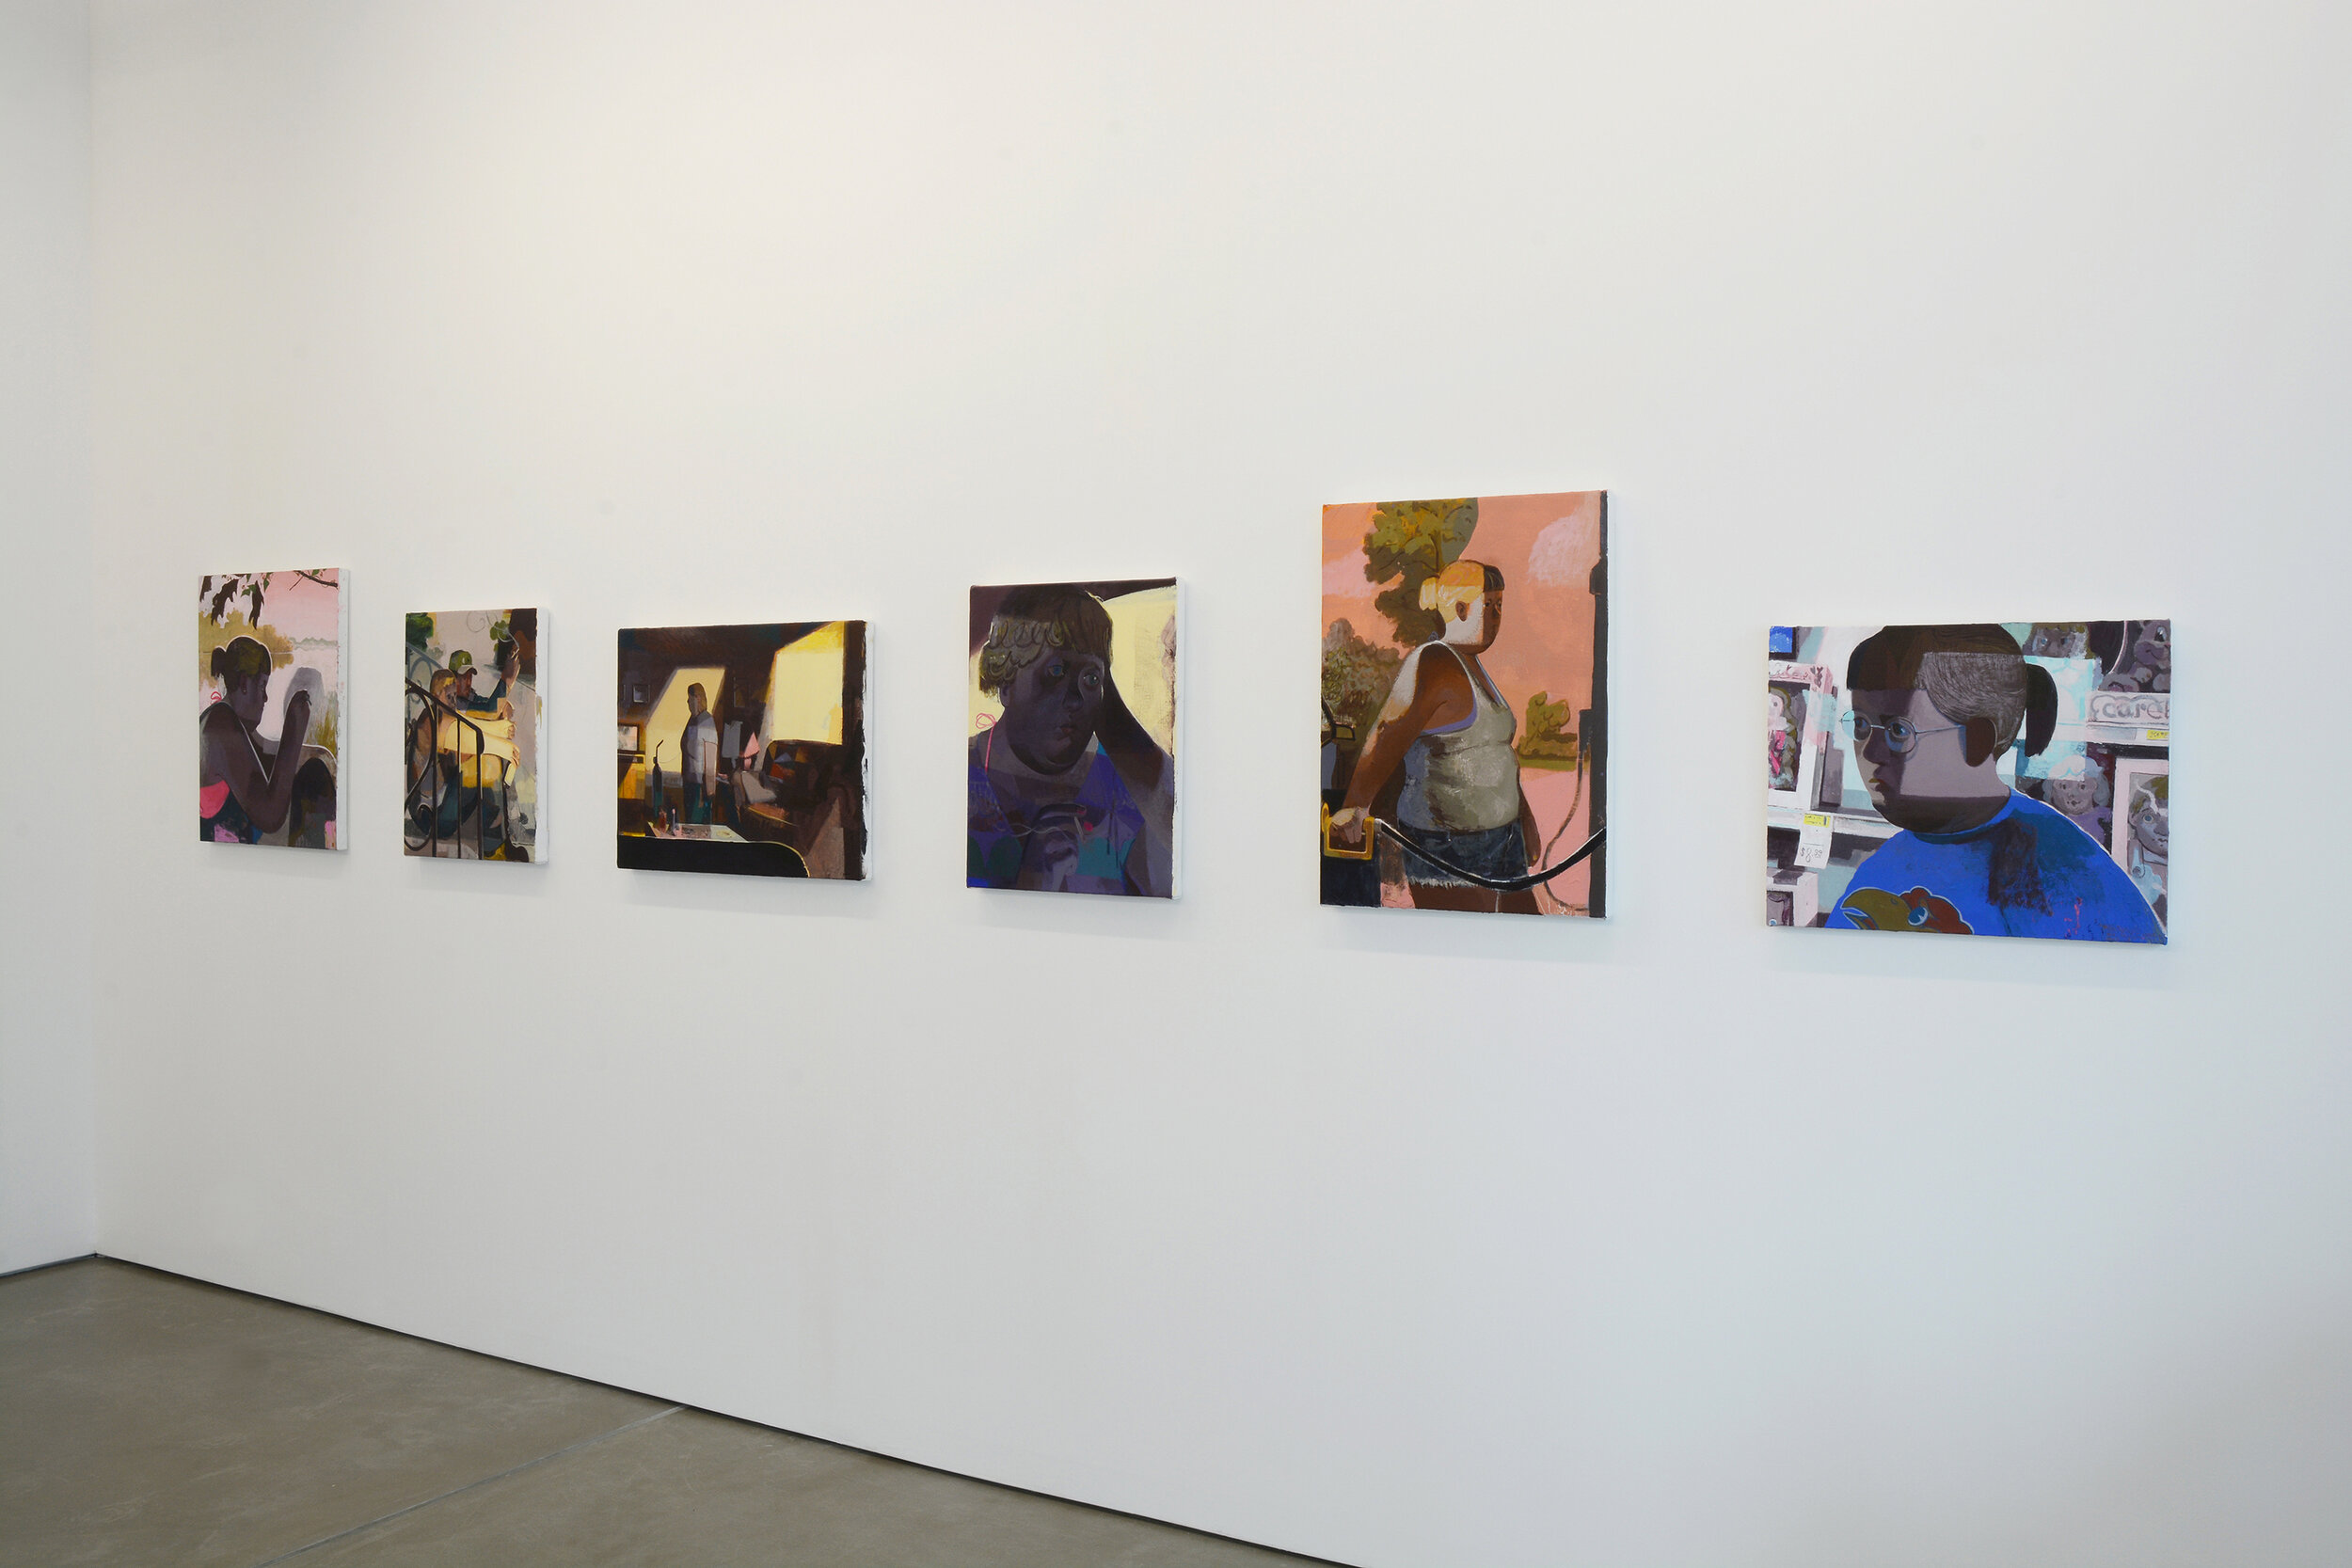  Installation view of  Collective Conscious  at Mother’s Tankstation, London, UK   April 15 - June 12, 2021 